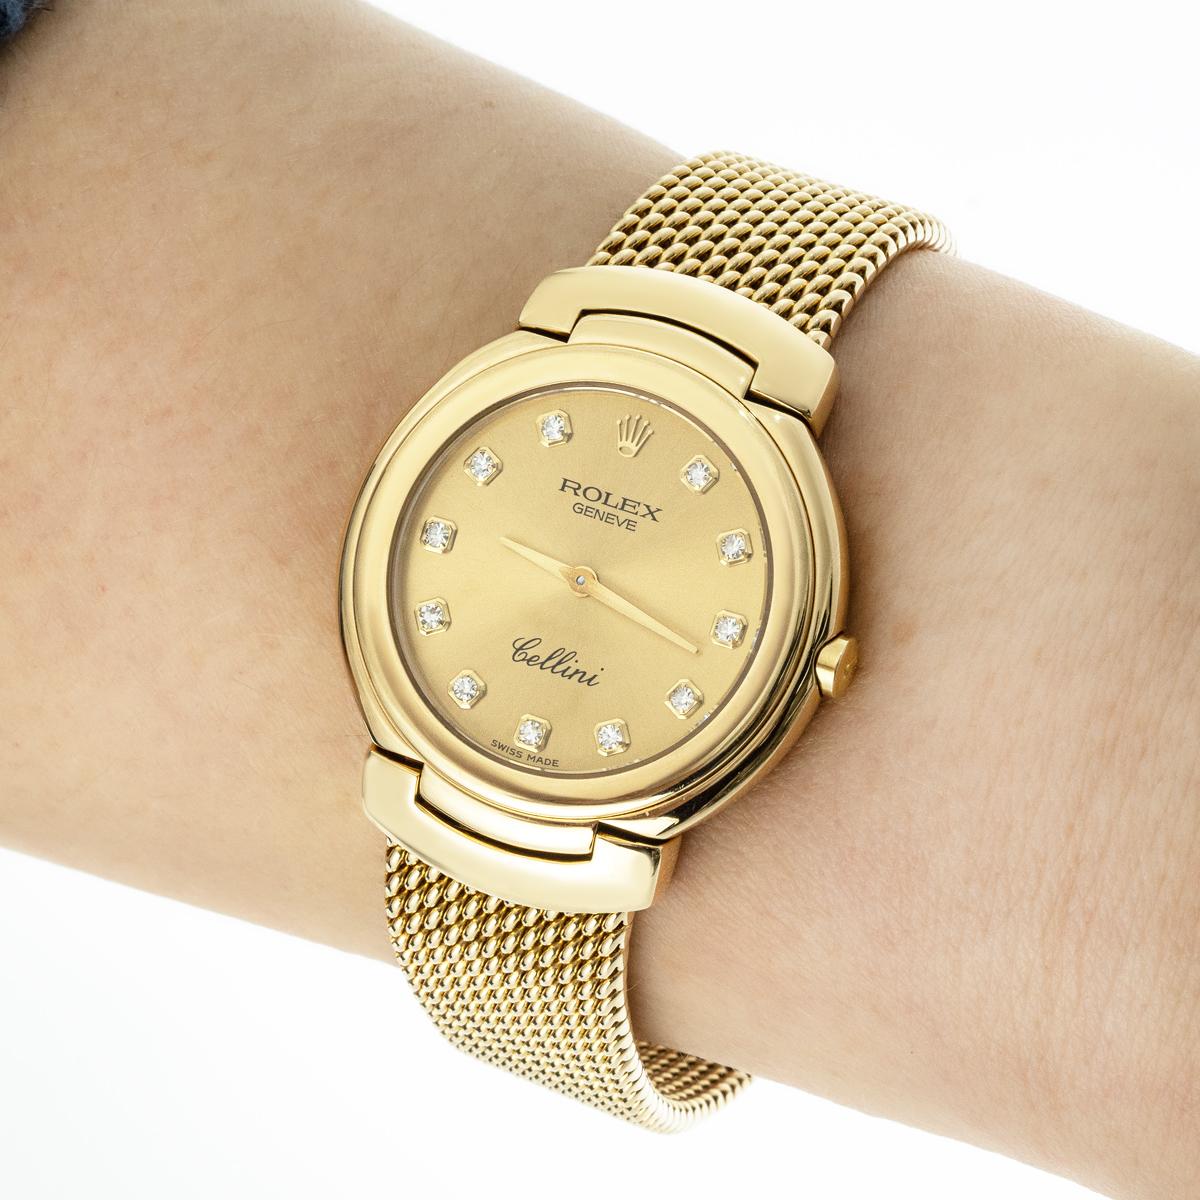 A Cellini wristwatch crafted in yellow gold by Rolex. Featuring a champagne dial with diamond set hour markers numerals and a yellow gold bezel. Equipped with a yellow gold integrated bracelet and deployant clasp. The watch is also fitted with a